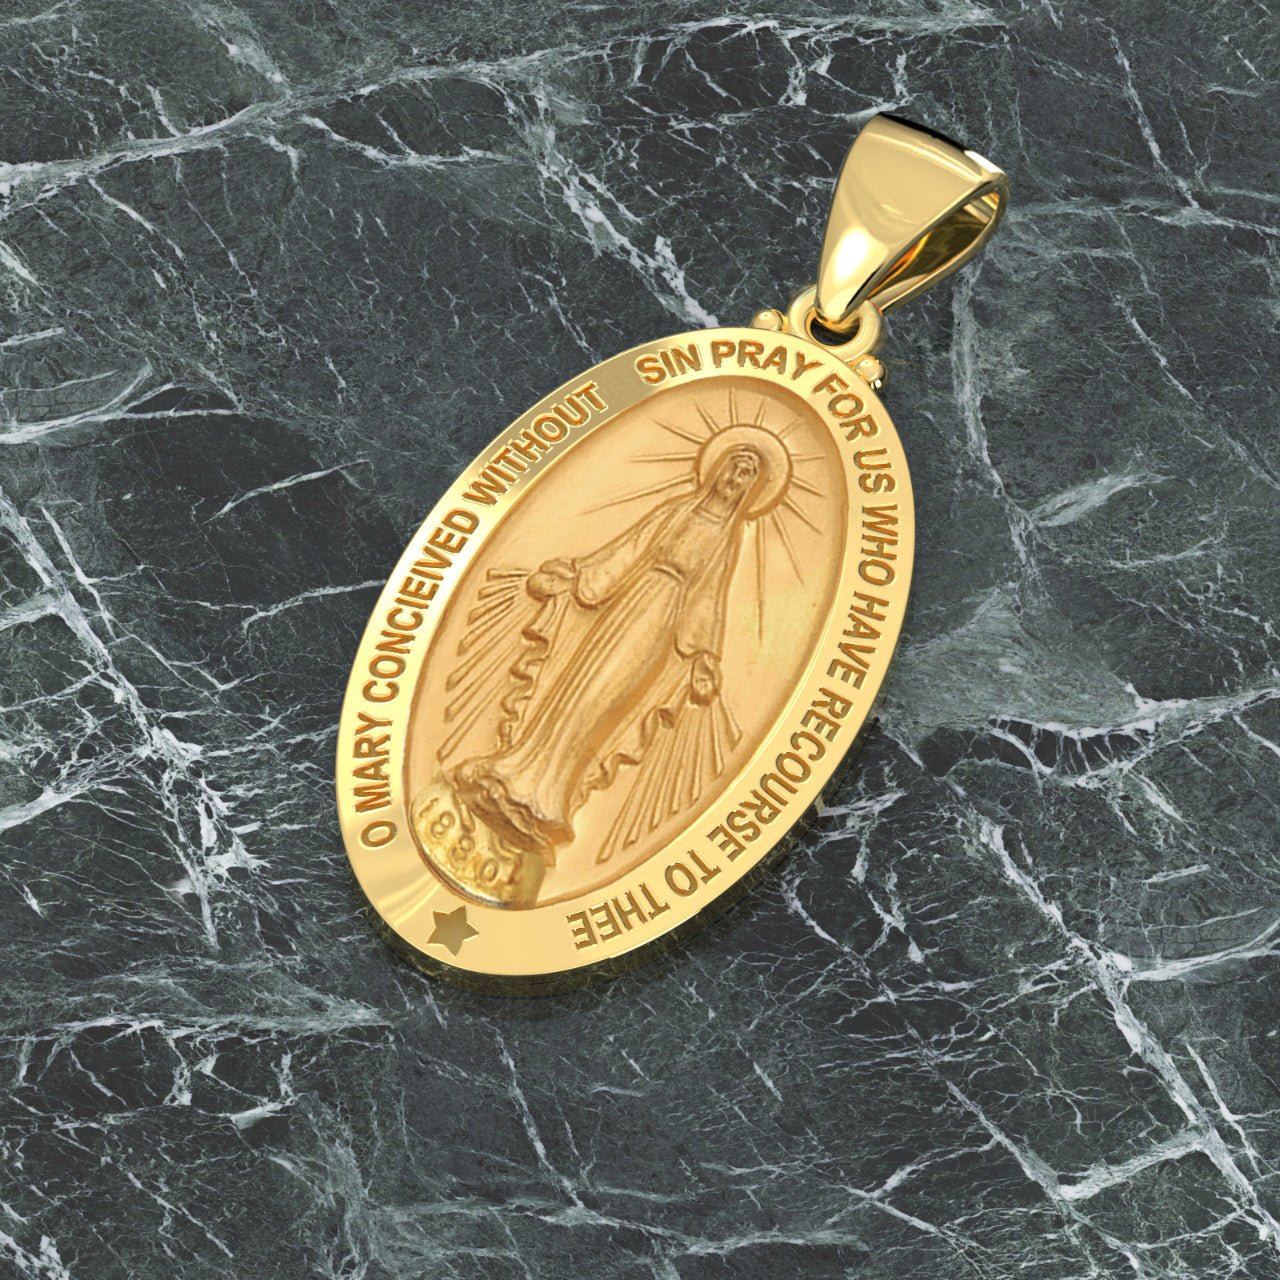 Virgin Mary Medal Pendant Necklace in 9ct Yellow Gold, Pendant Only - No Chain